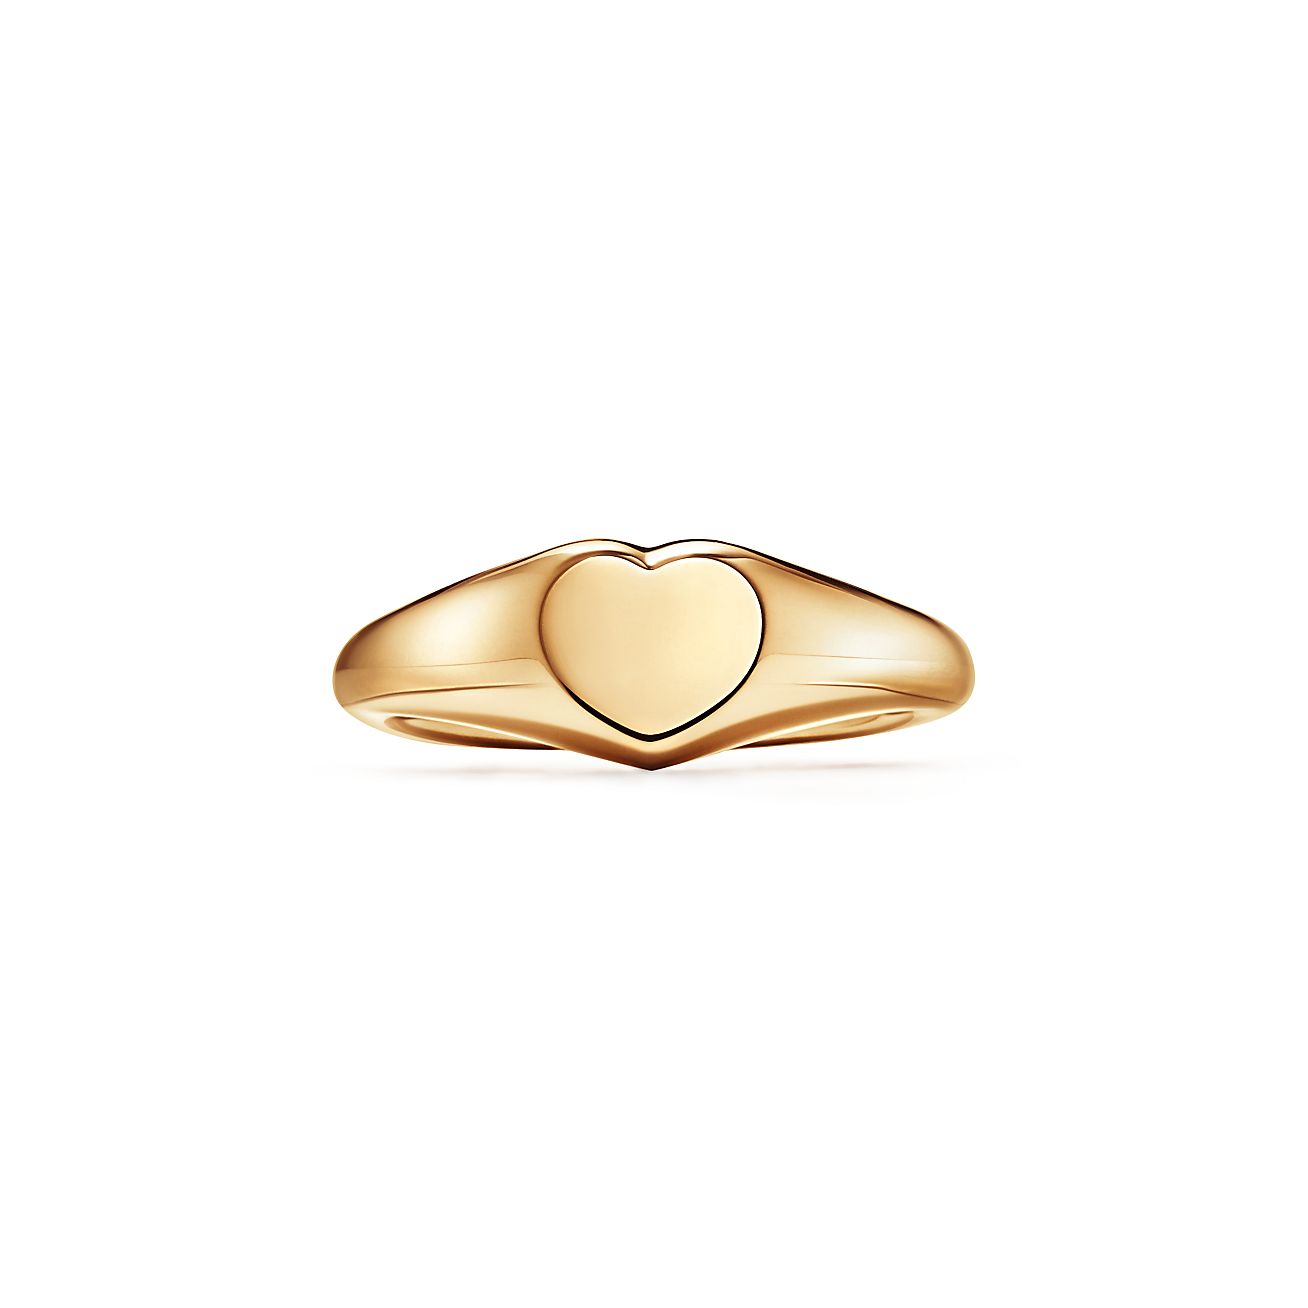 Gold Heart ring